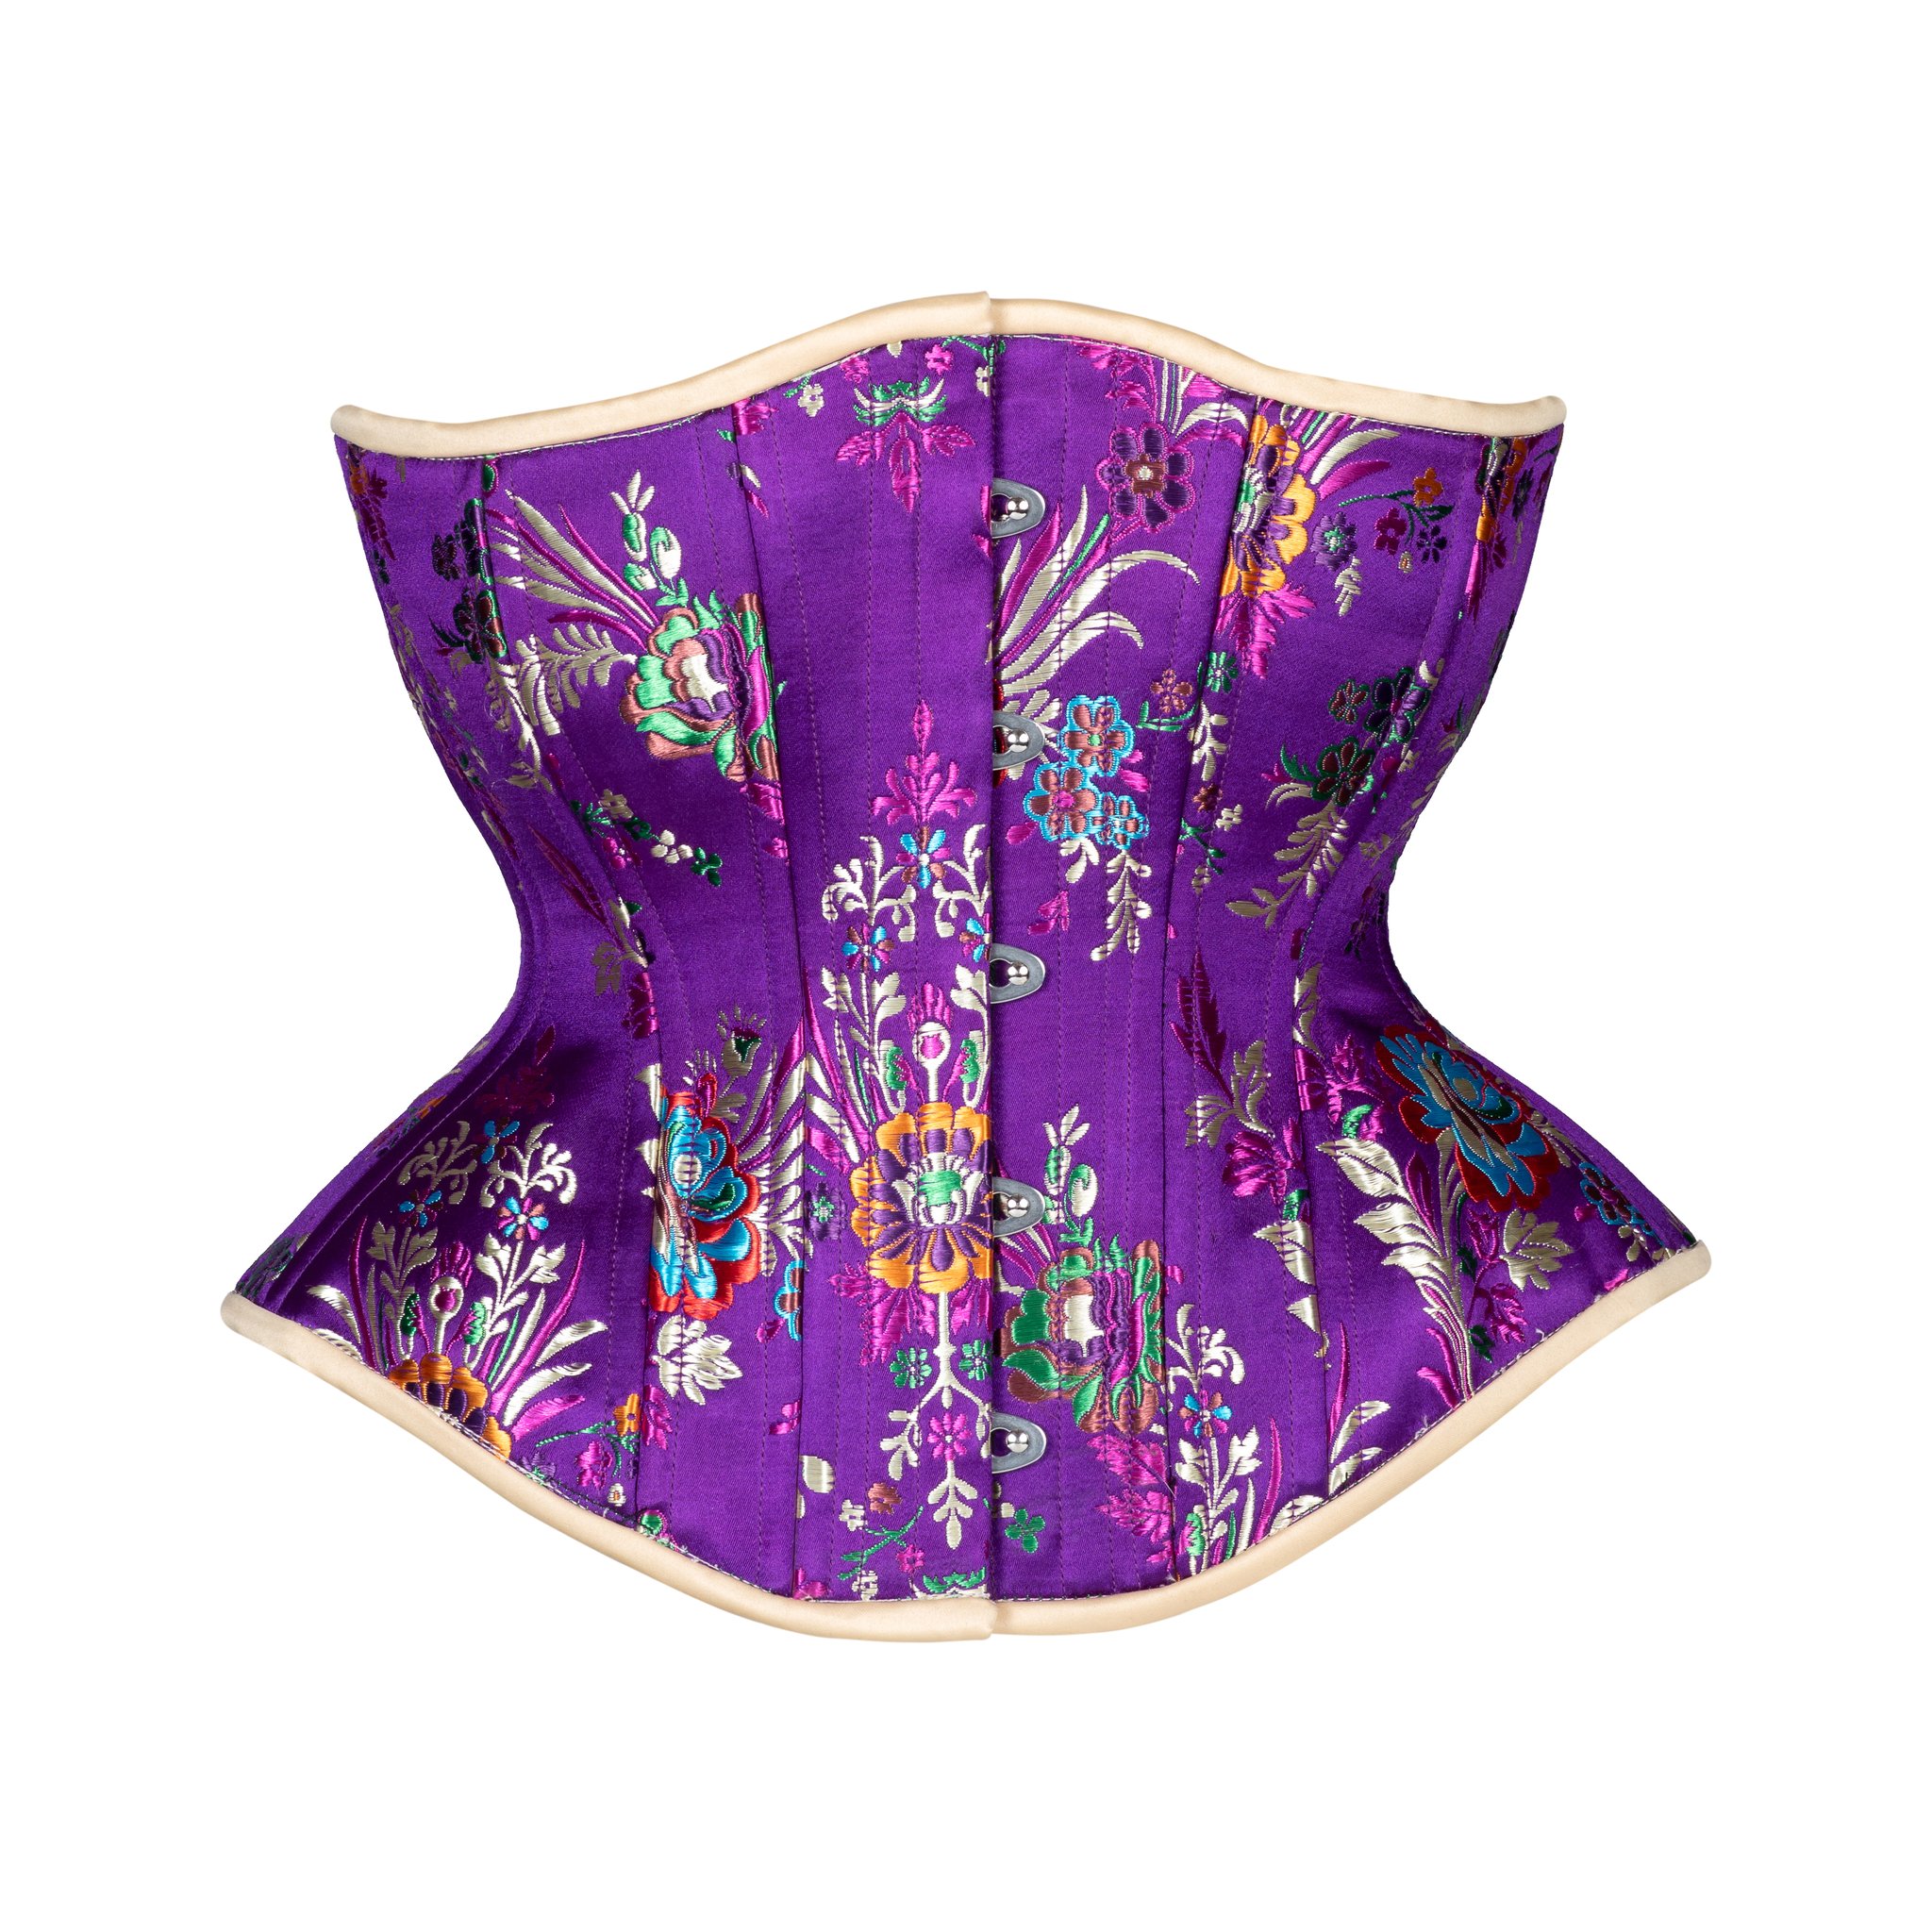 Corset Story UK - Are you ready to celebrate Mardi Gras on 25th